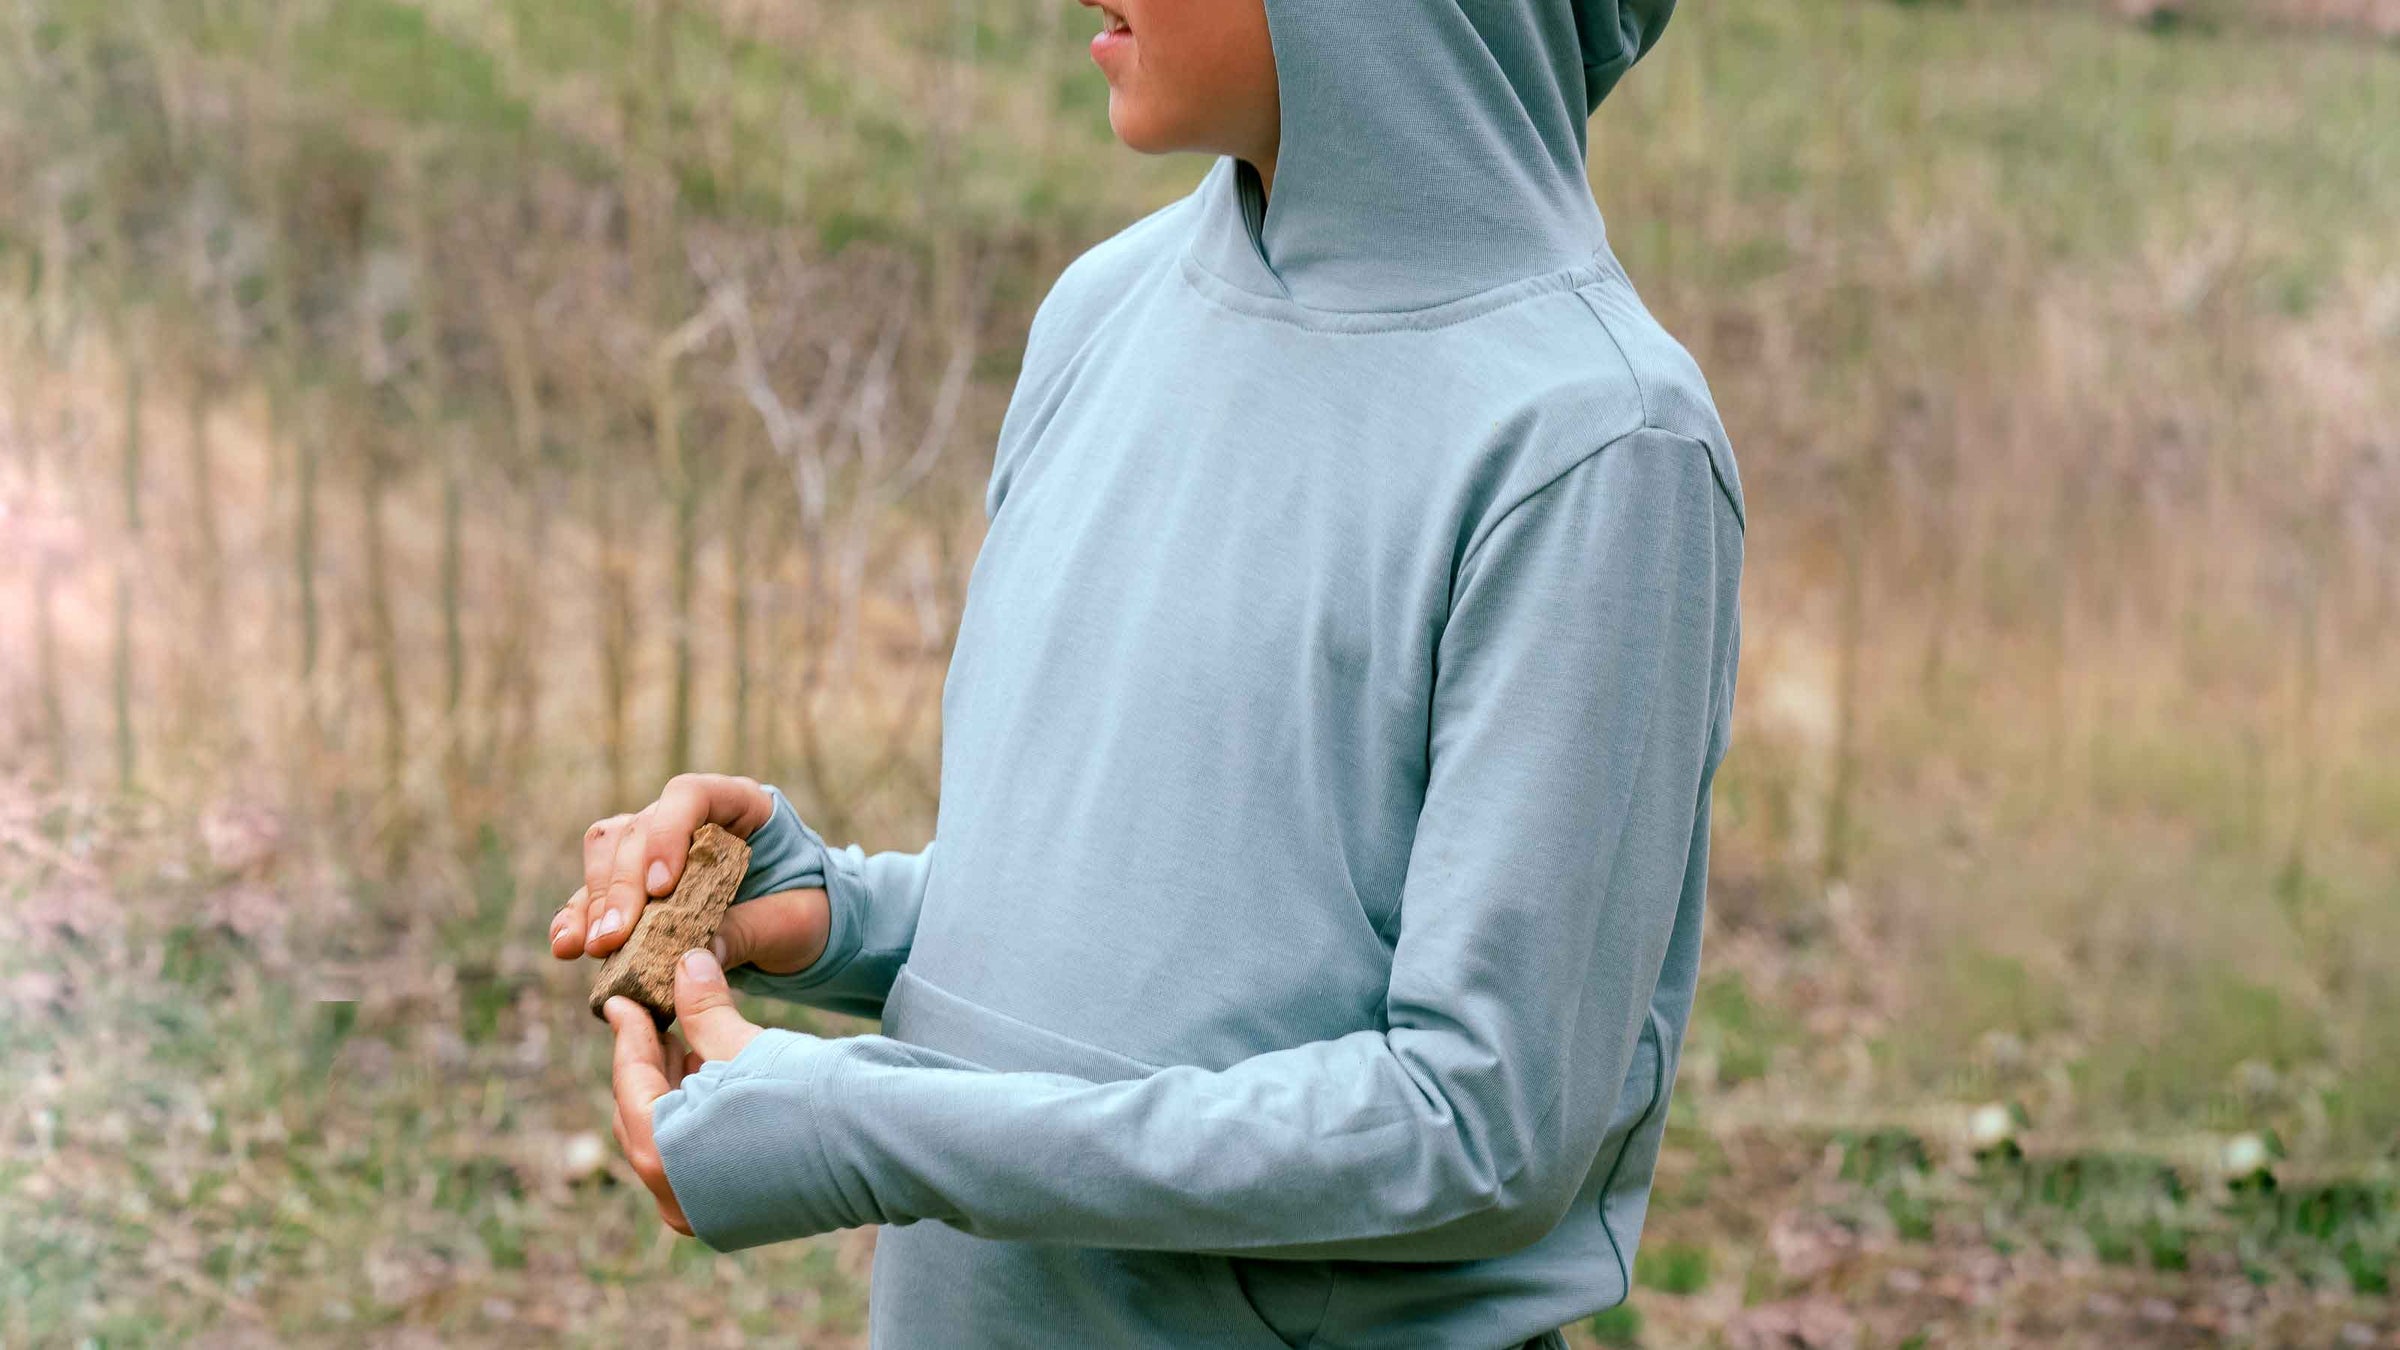 The Toddler Chaser hoodie protects your toddler and child from the sun while outdoors.